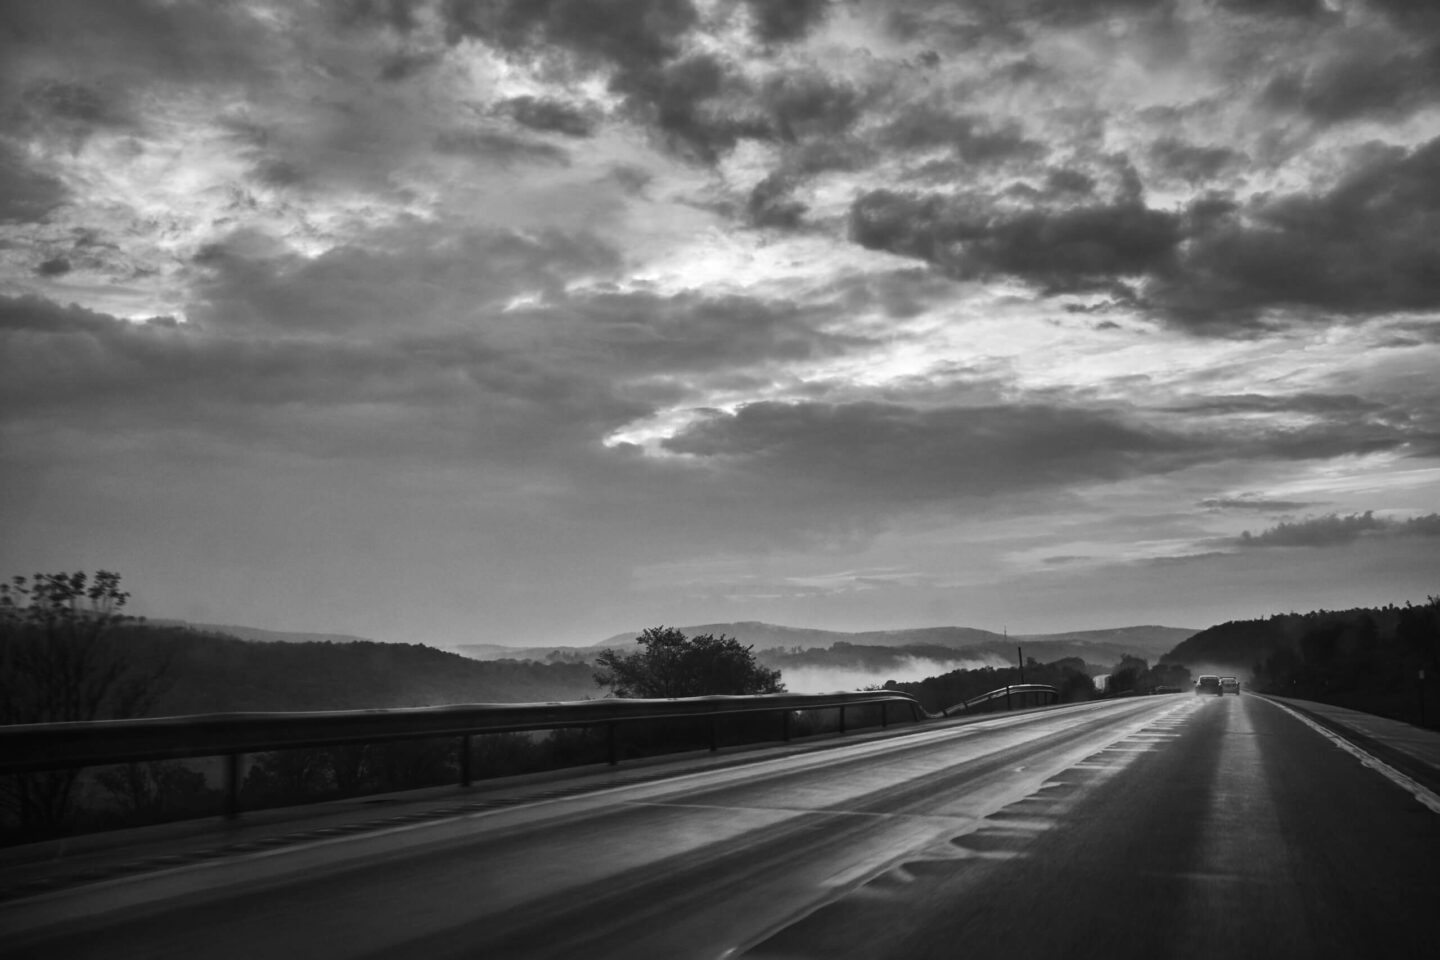 Landscape Photography Tips - Travel Photography Ideas - Road Trip to Syracuse New York - Fujifilm X100T